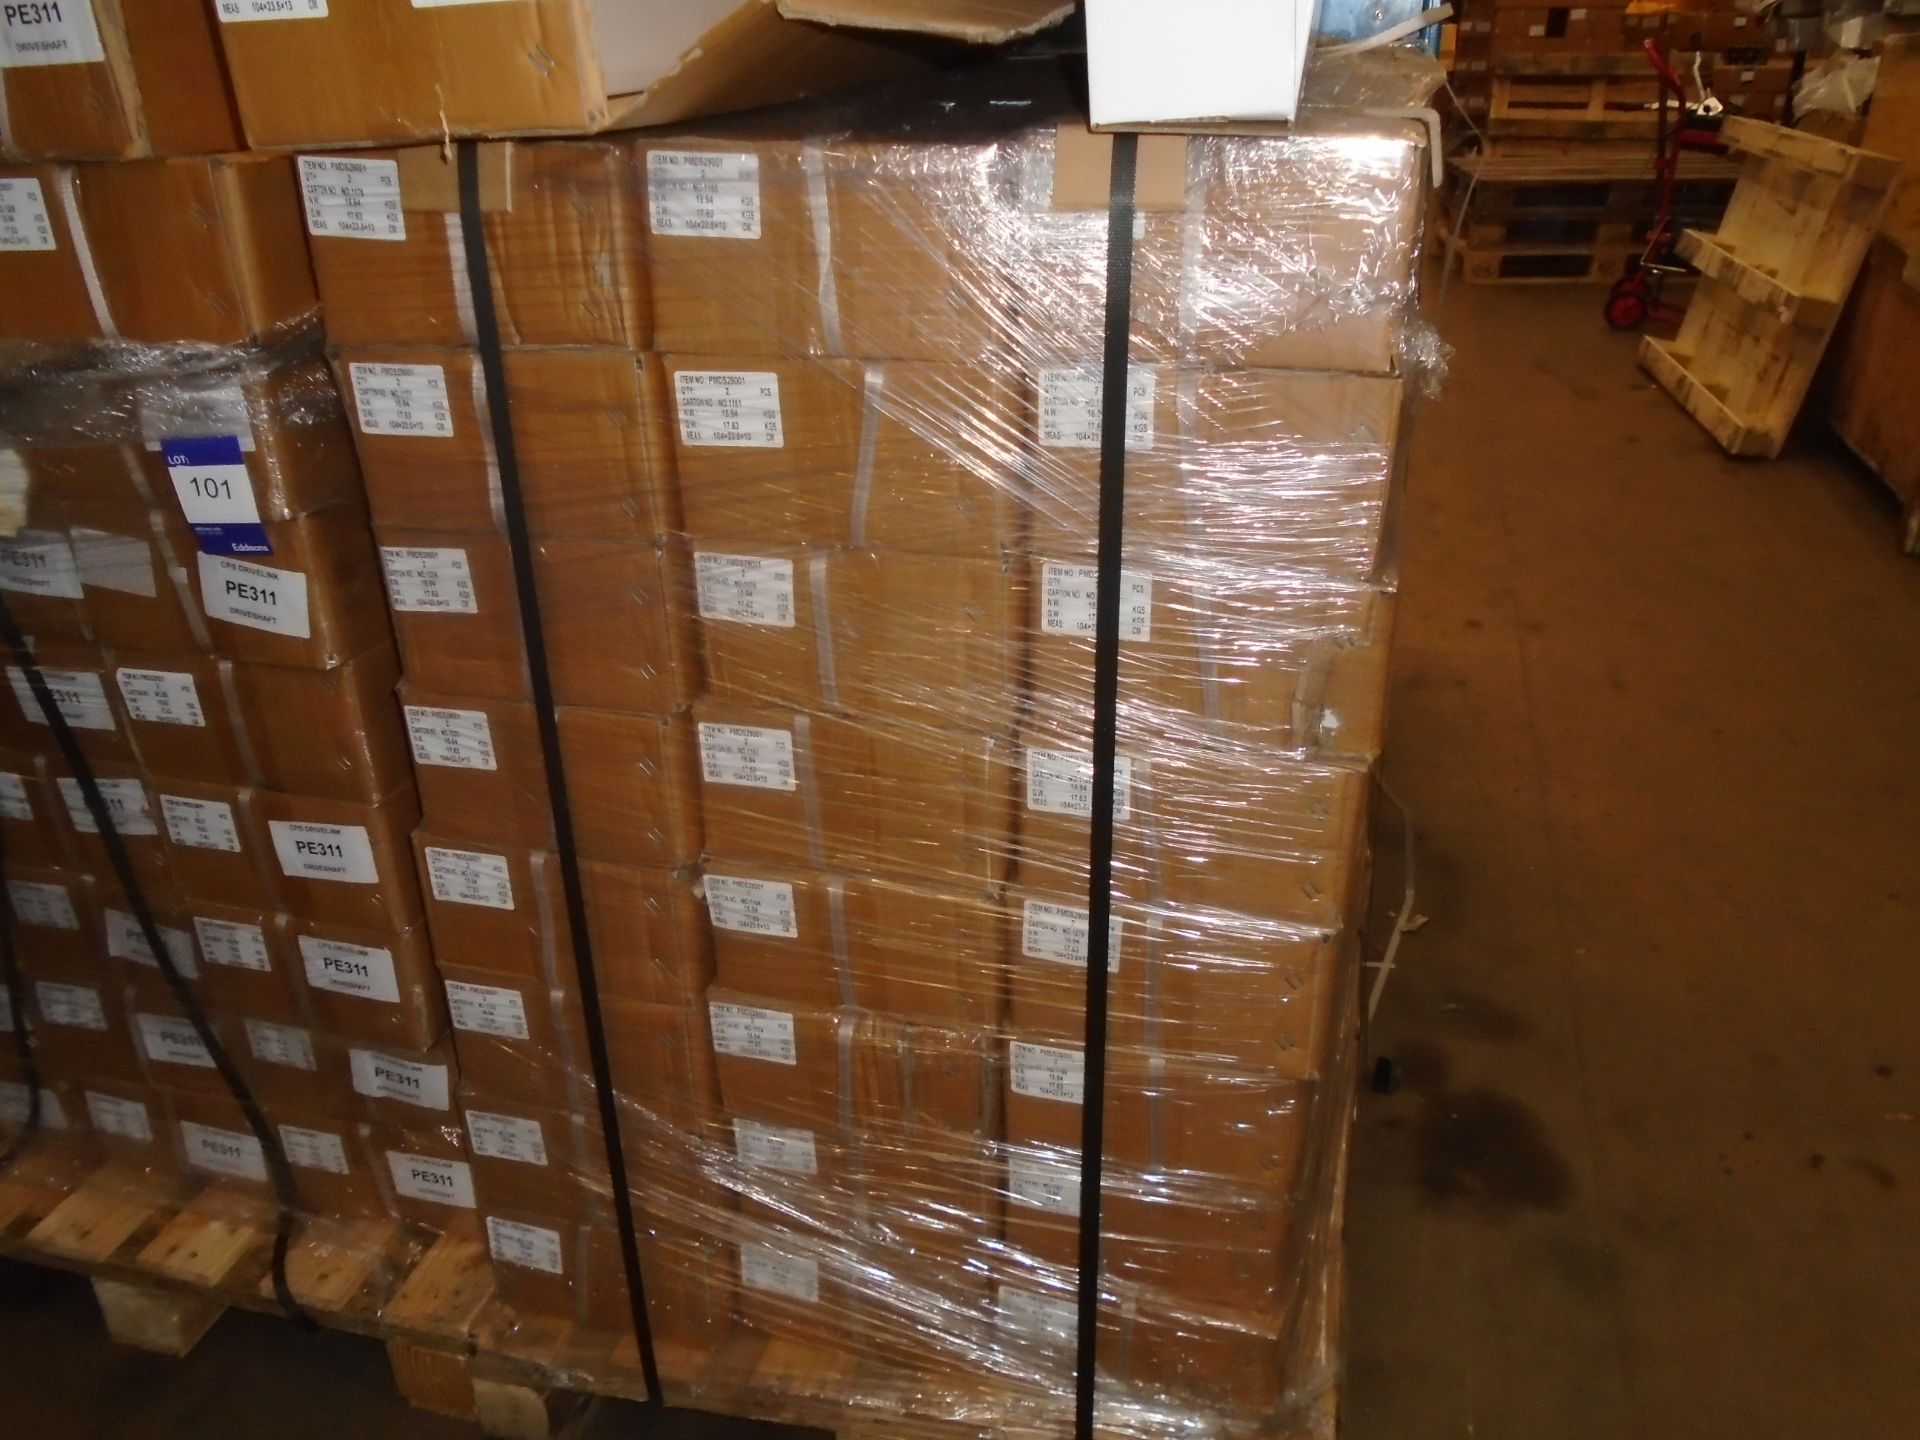 25 x Boxes (2 per box) PMDS29001 New Drive Shafts – Located Mezzanine Floor. - Image 3 of 4